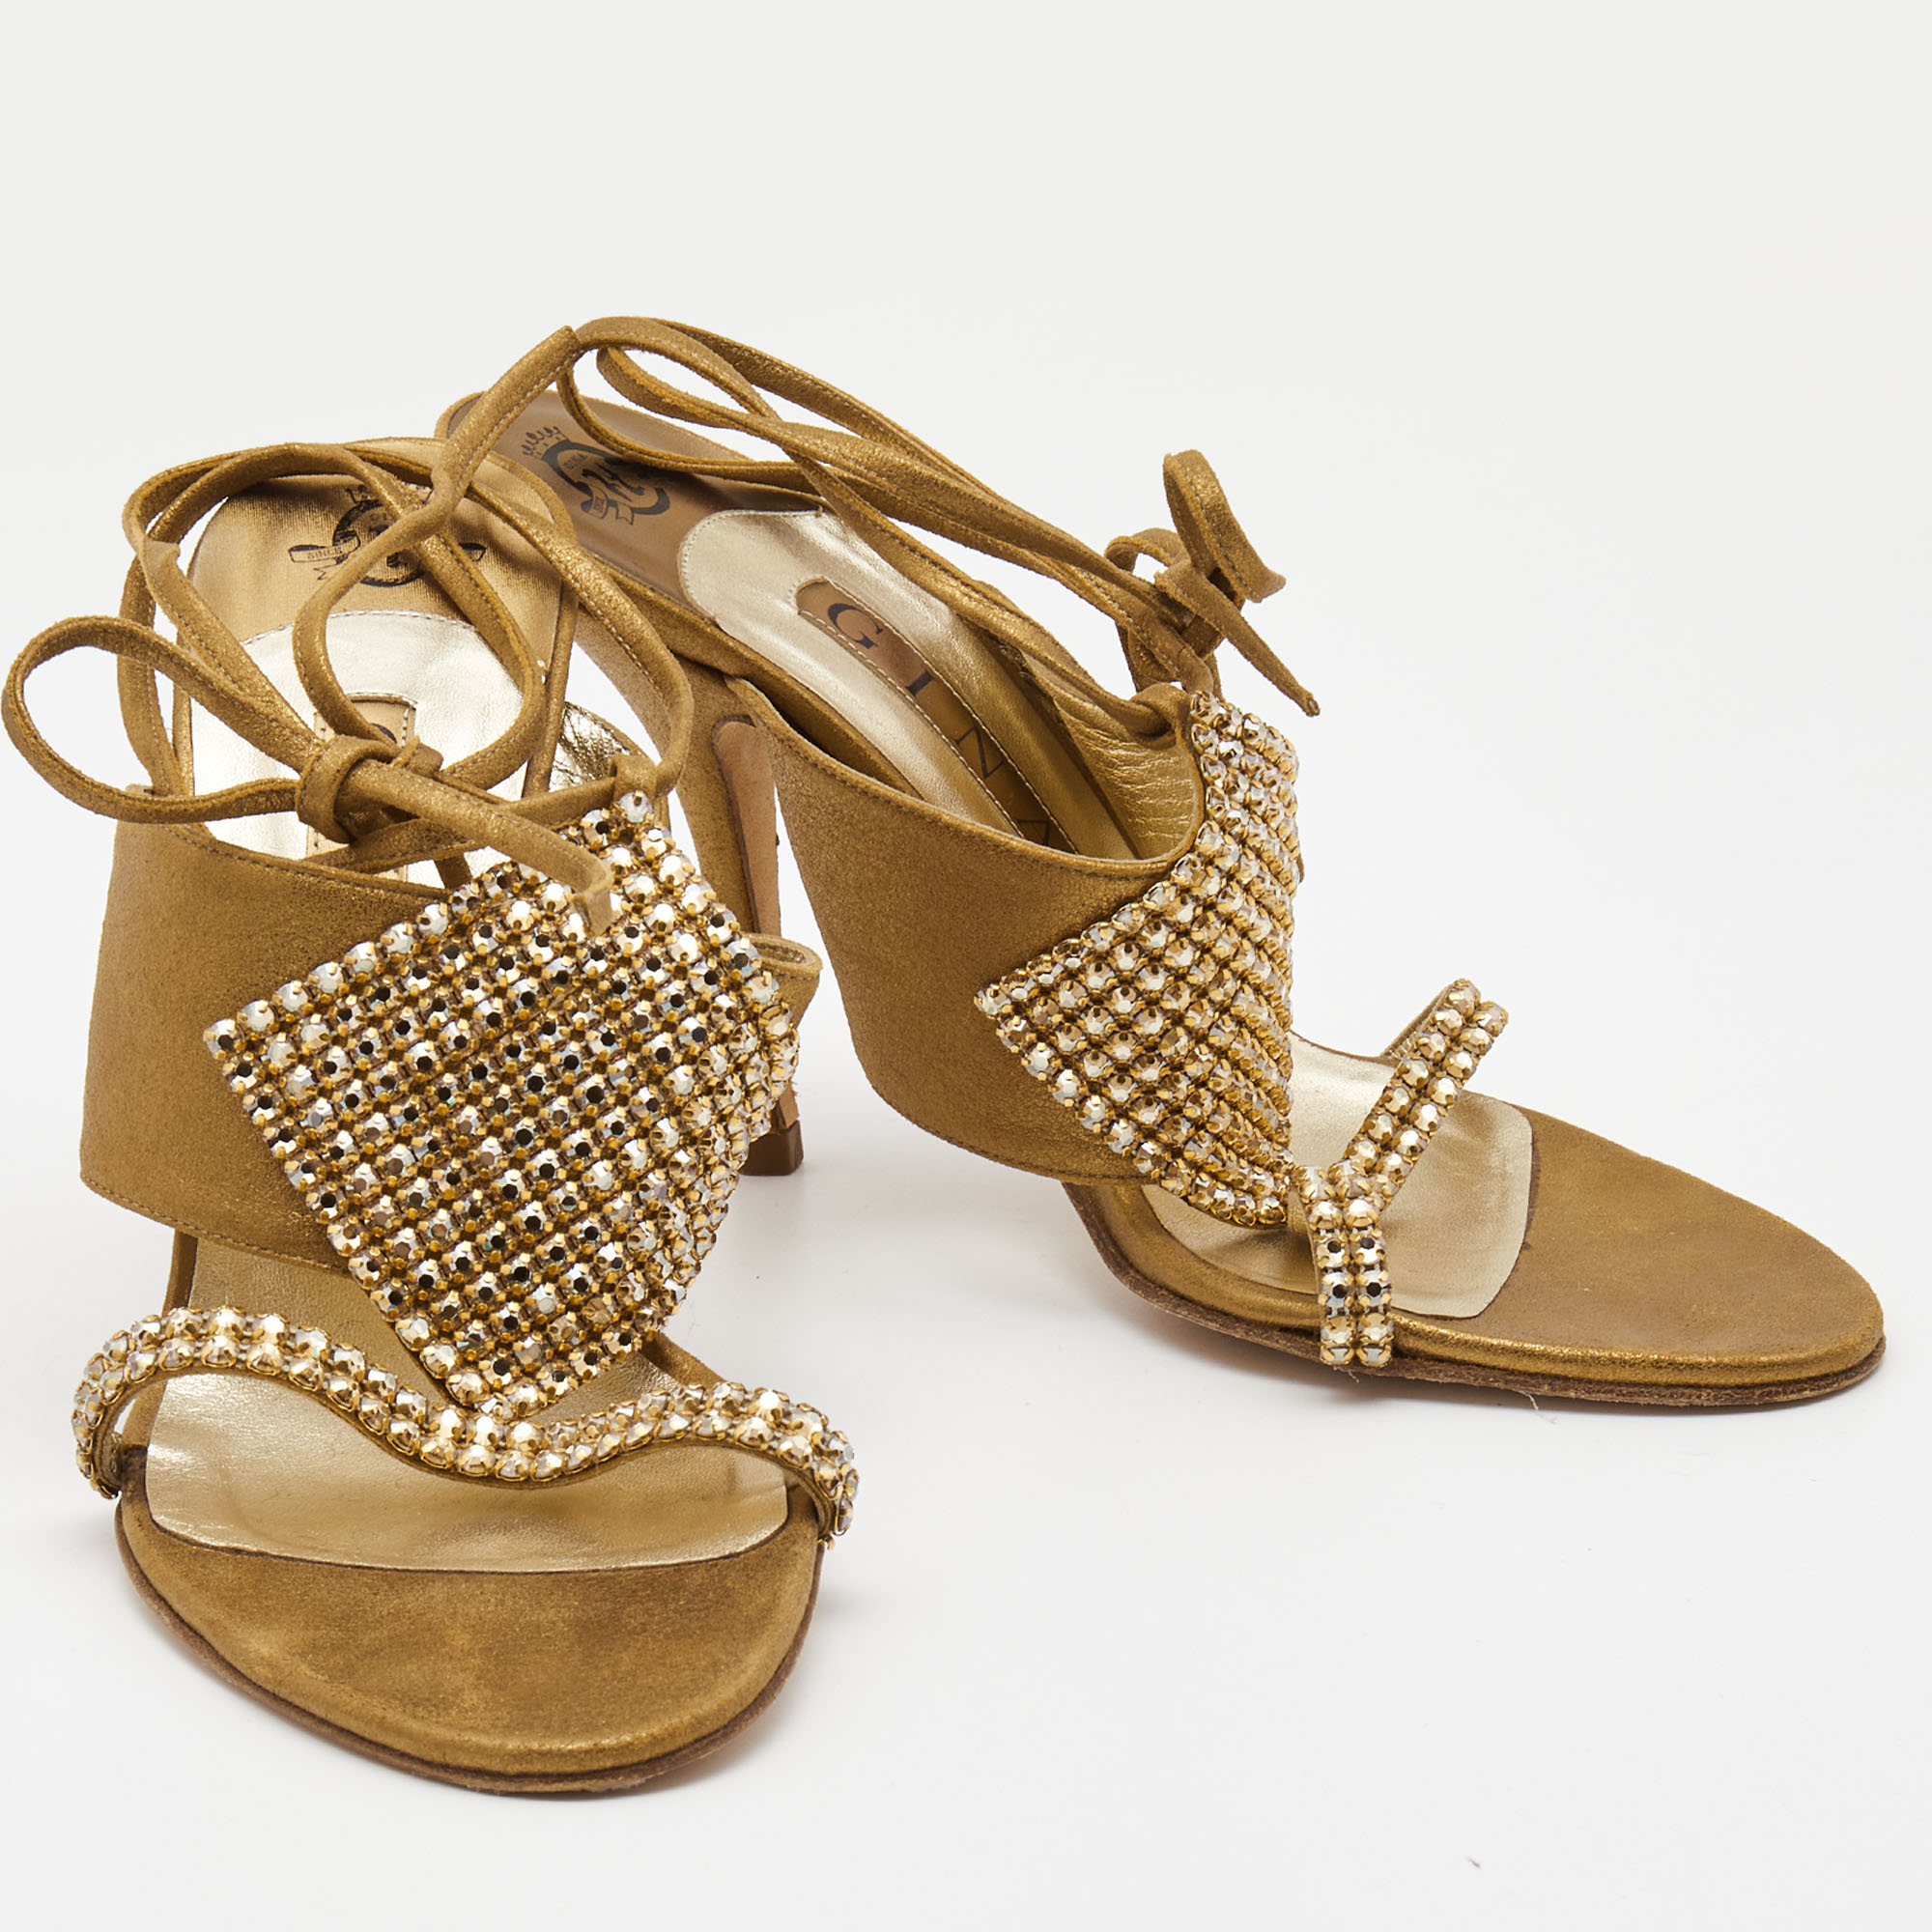 Gina Metallic Gold Leather Crystal Embellished Ankle Wrap Sandals Size 39